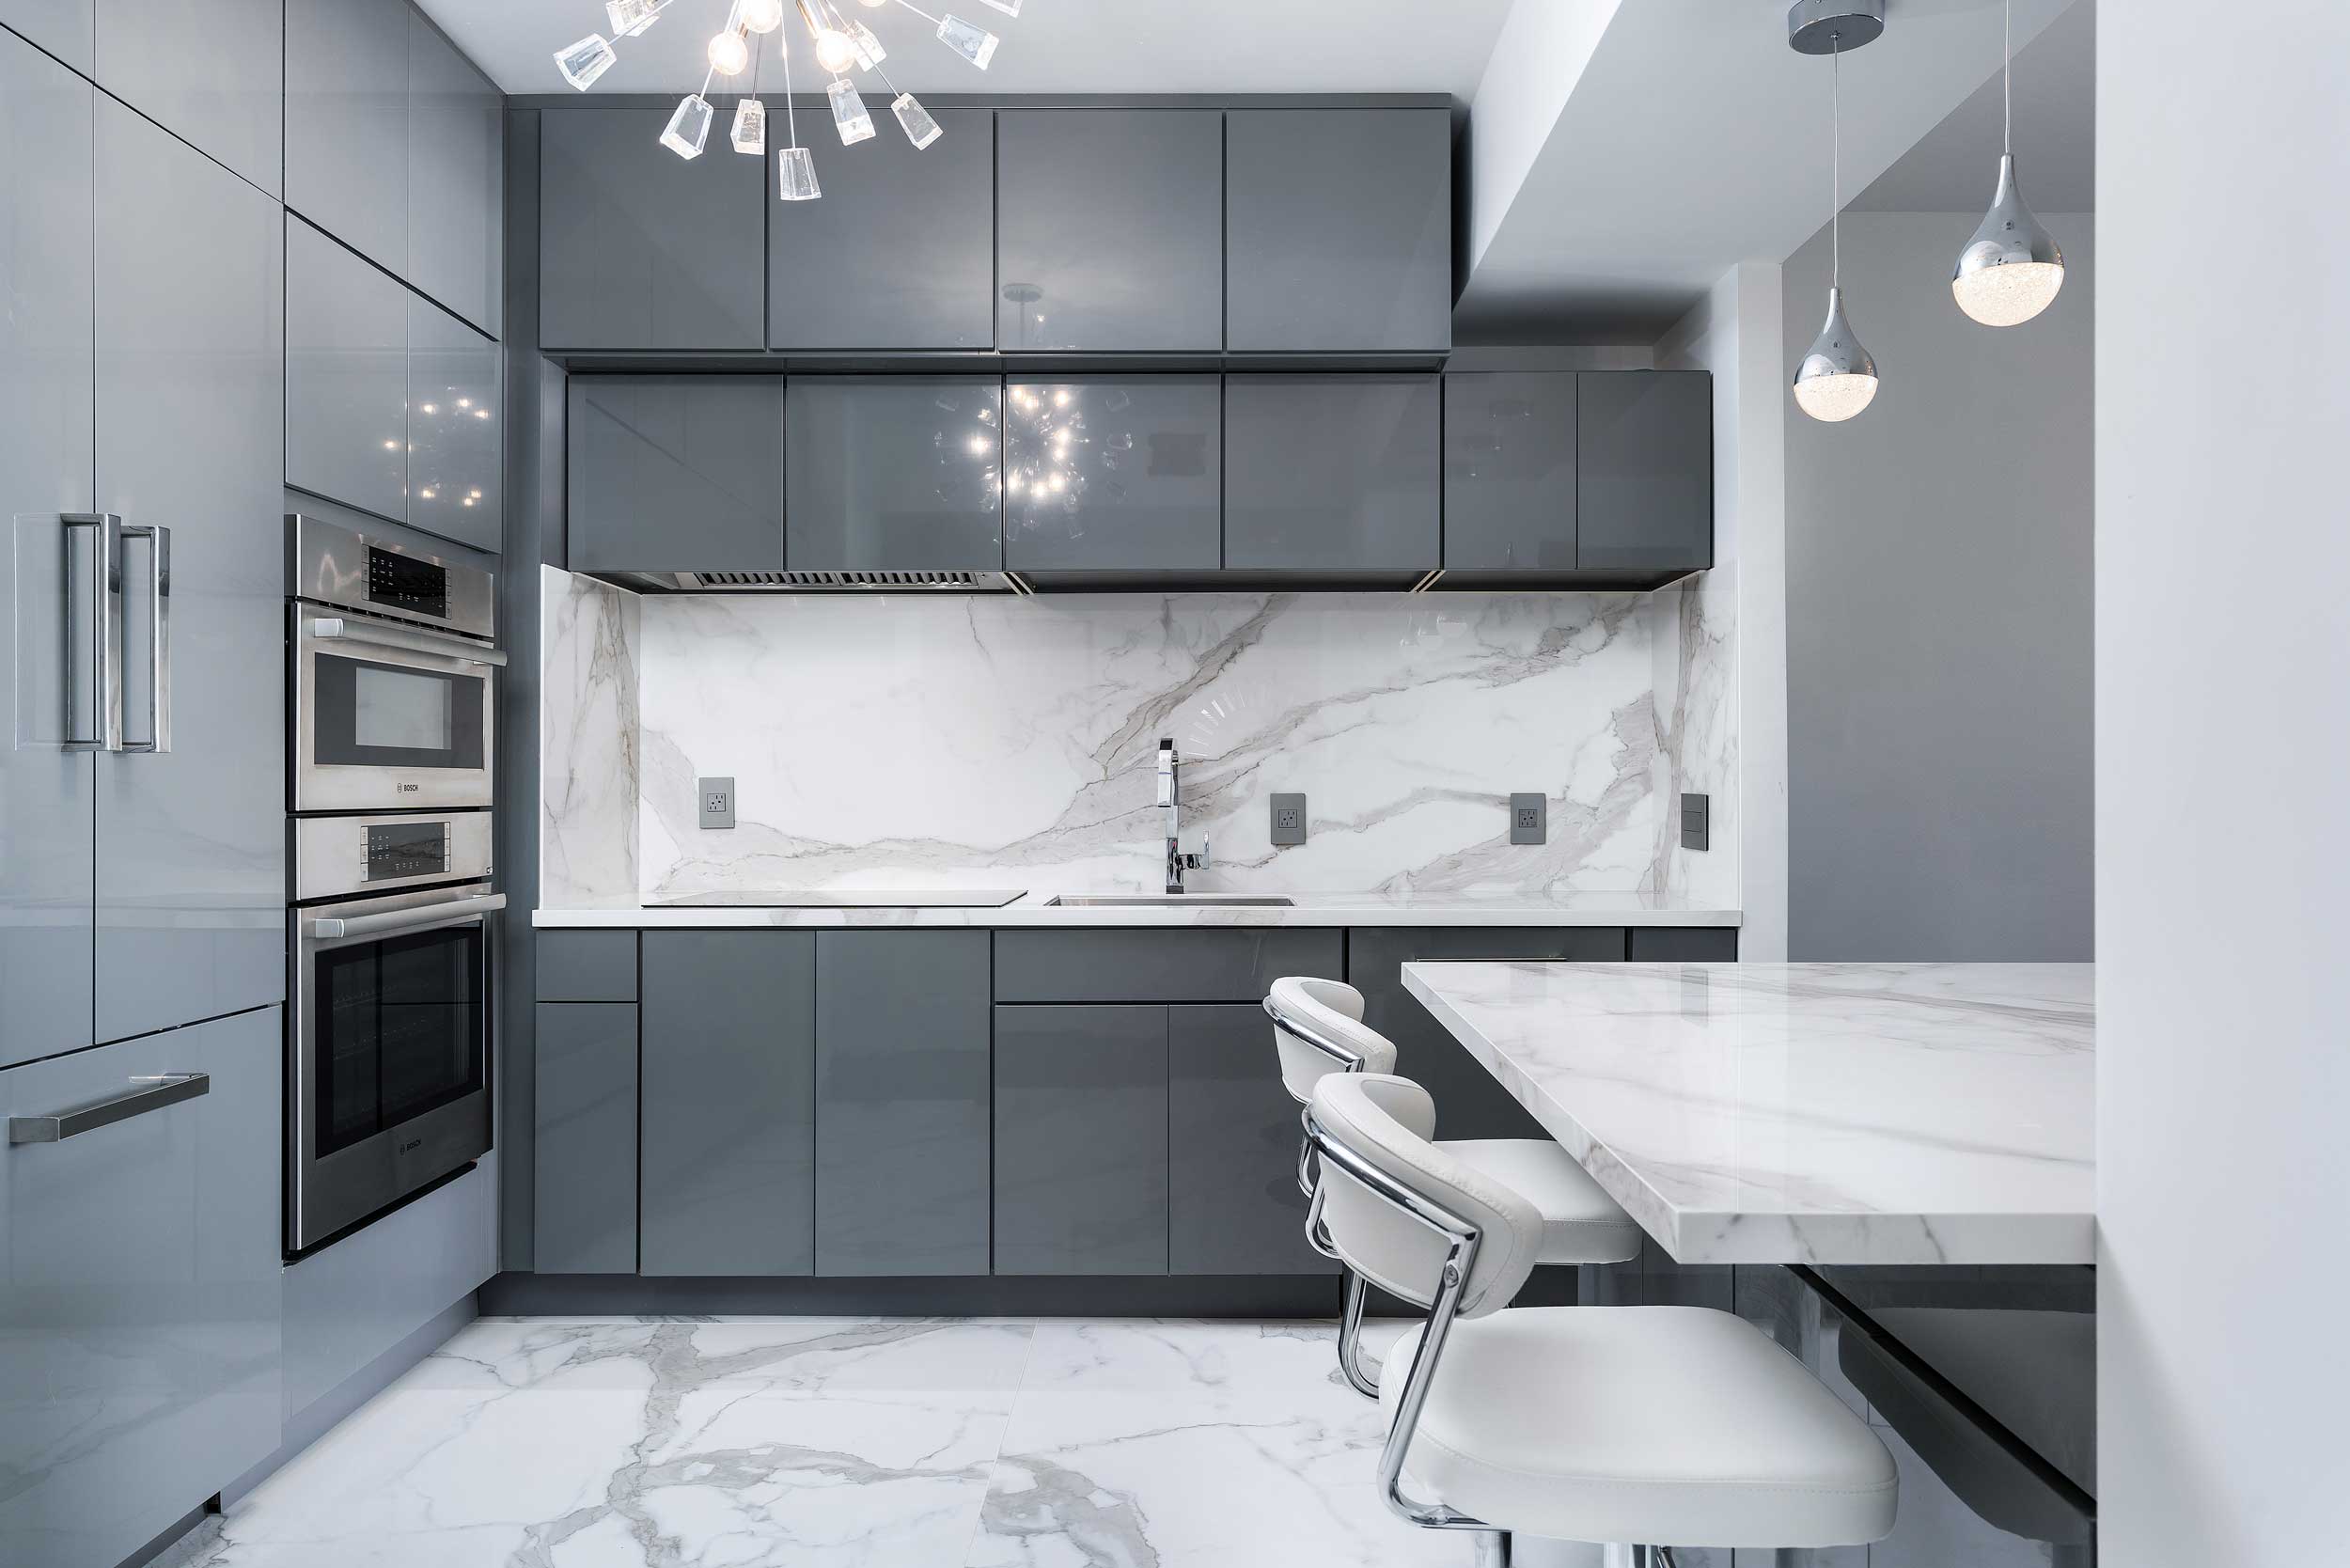 Large-format Porcelain Sintered Stone Kitchen Countertops and Backsplash in White Classico